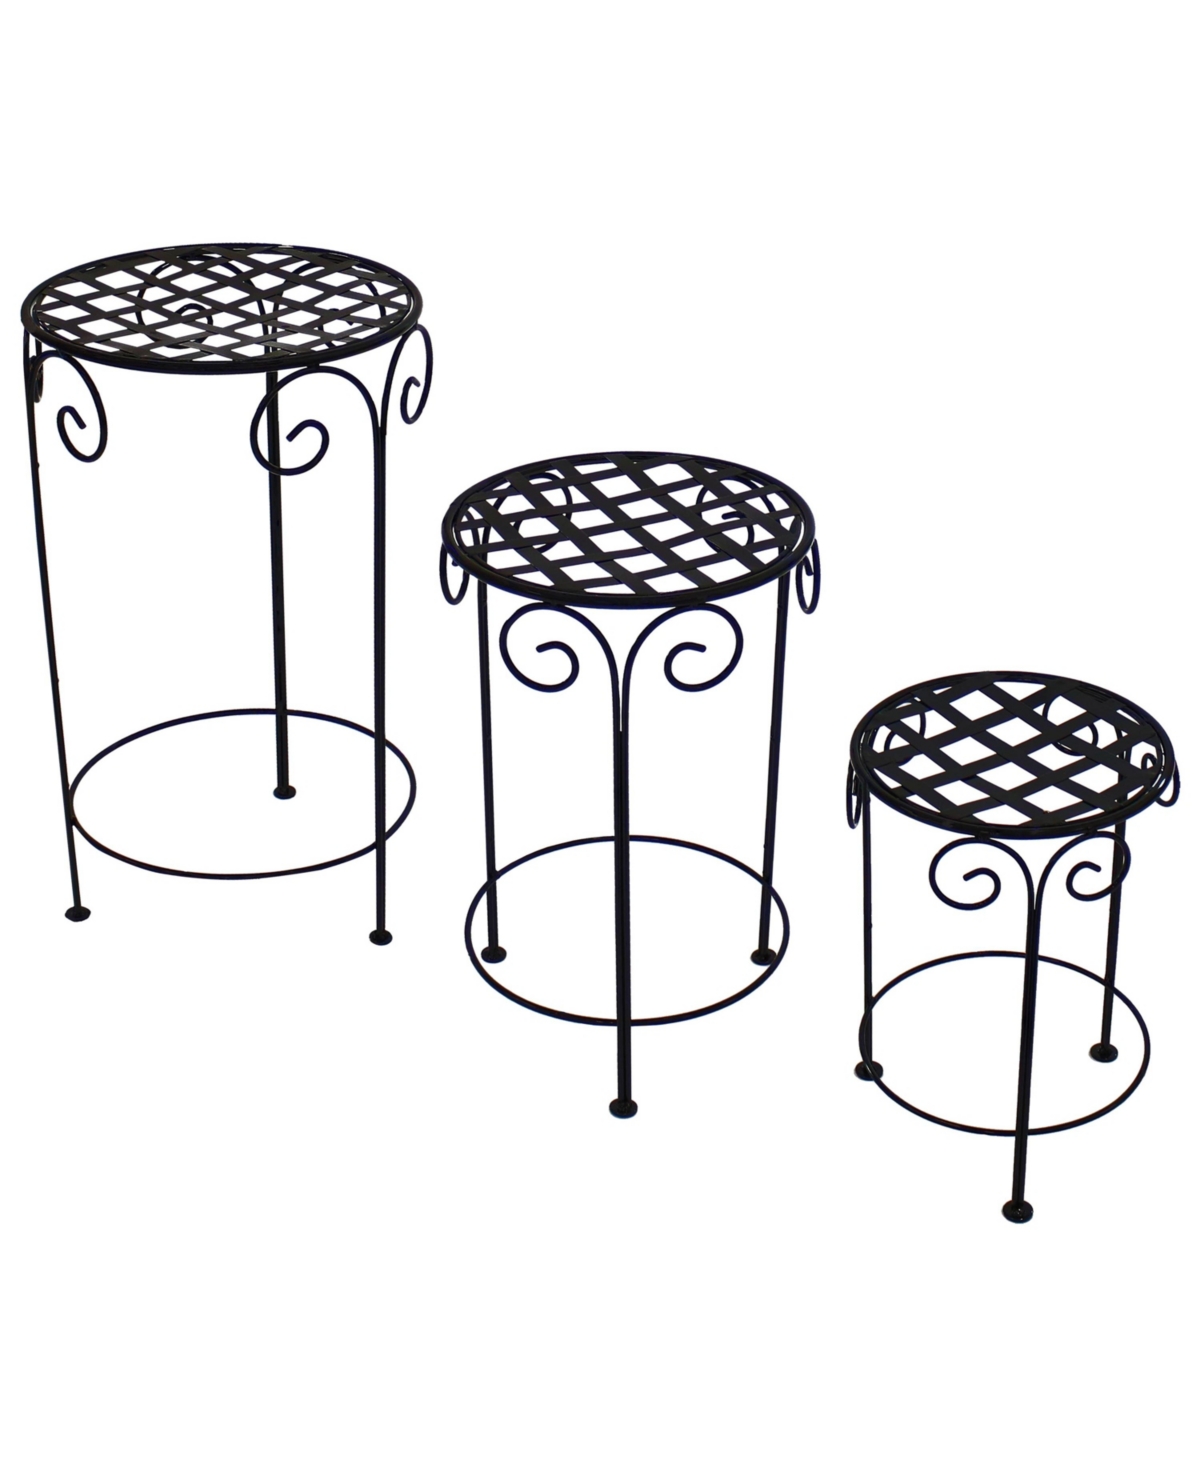 Black Iron 14 in, 19 in, 24 in Plant Stand with Scroll Design - Black